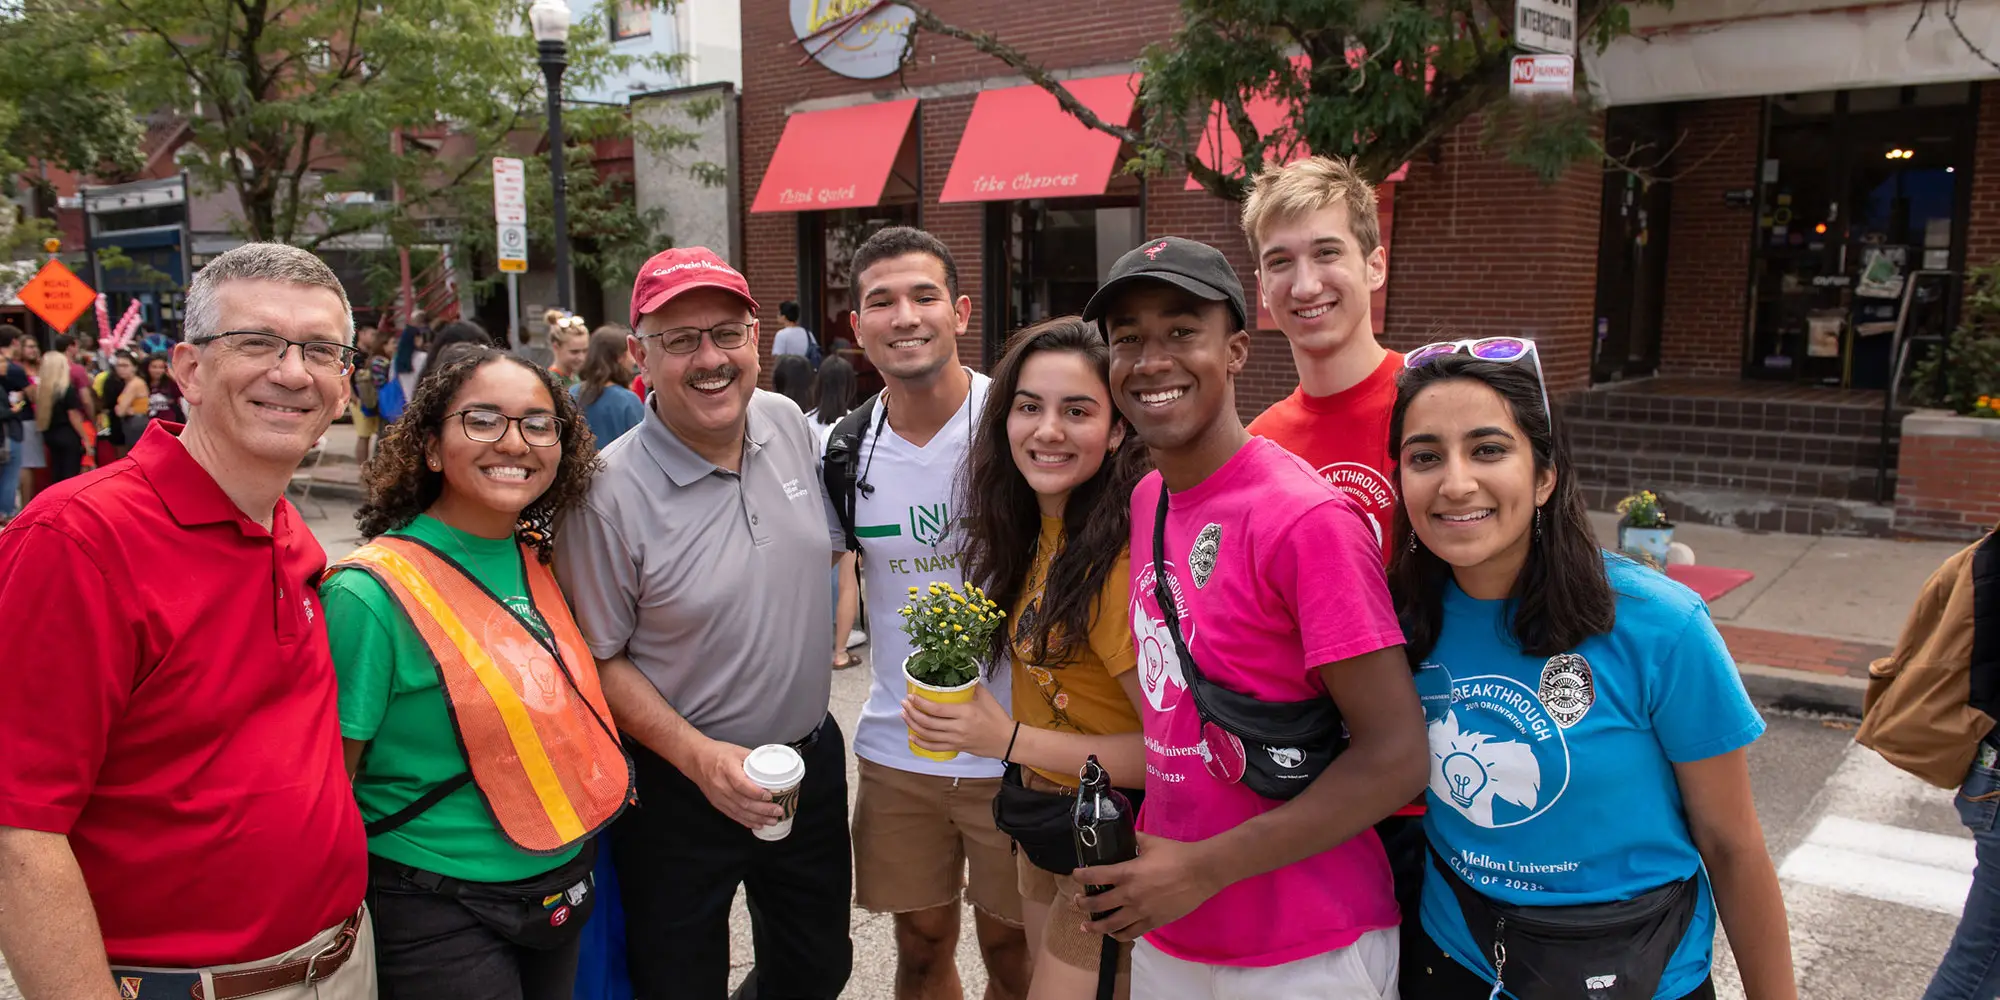 Students in a group with President Farnam and Provost Garrett during the Craig Street Crawl.